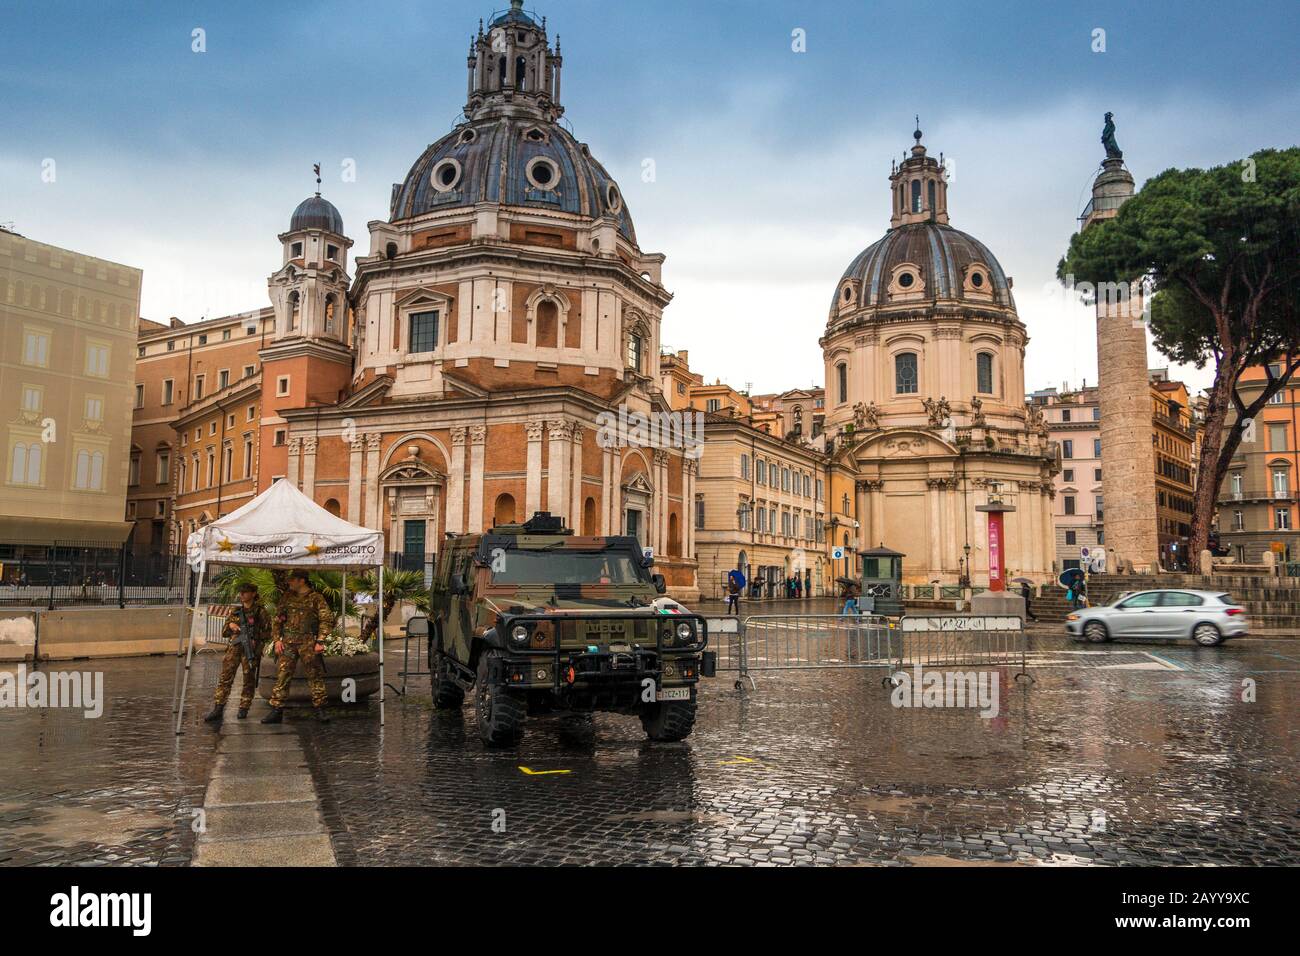 Soldiers protect the city's famous at Altar of the Fatherland with military personnel patrolling on high anti terrorism alert with check point Rome Stock Photo